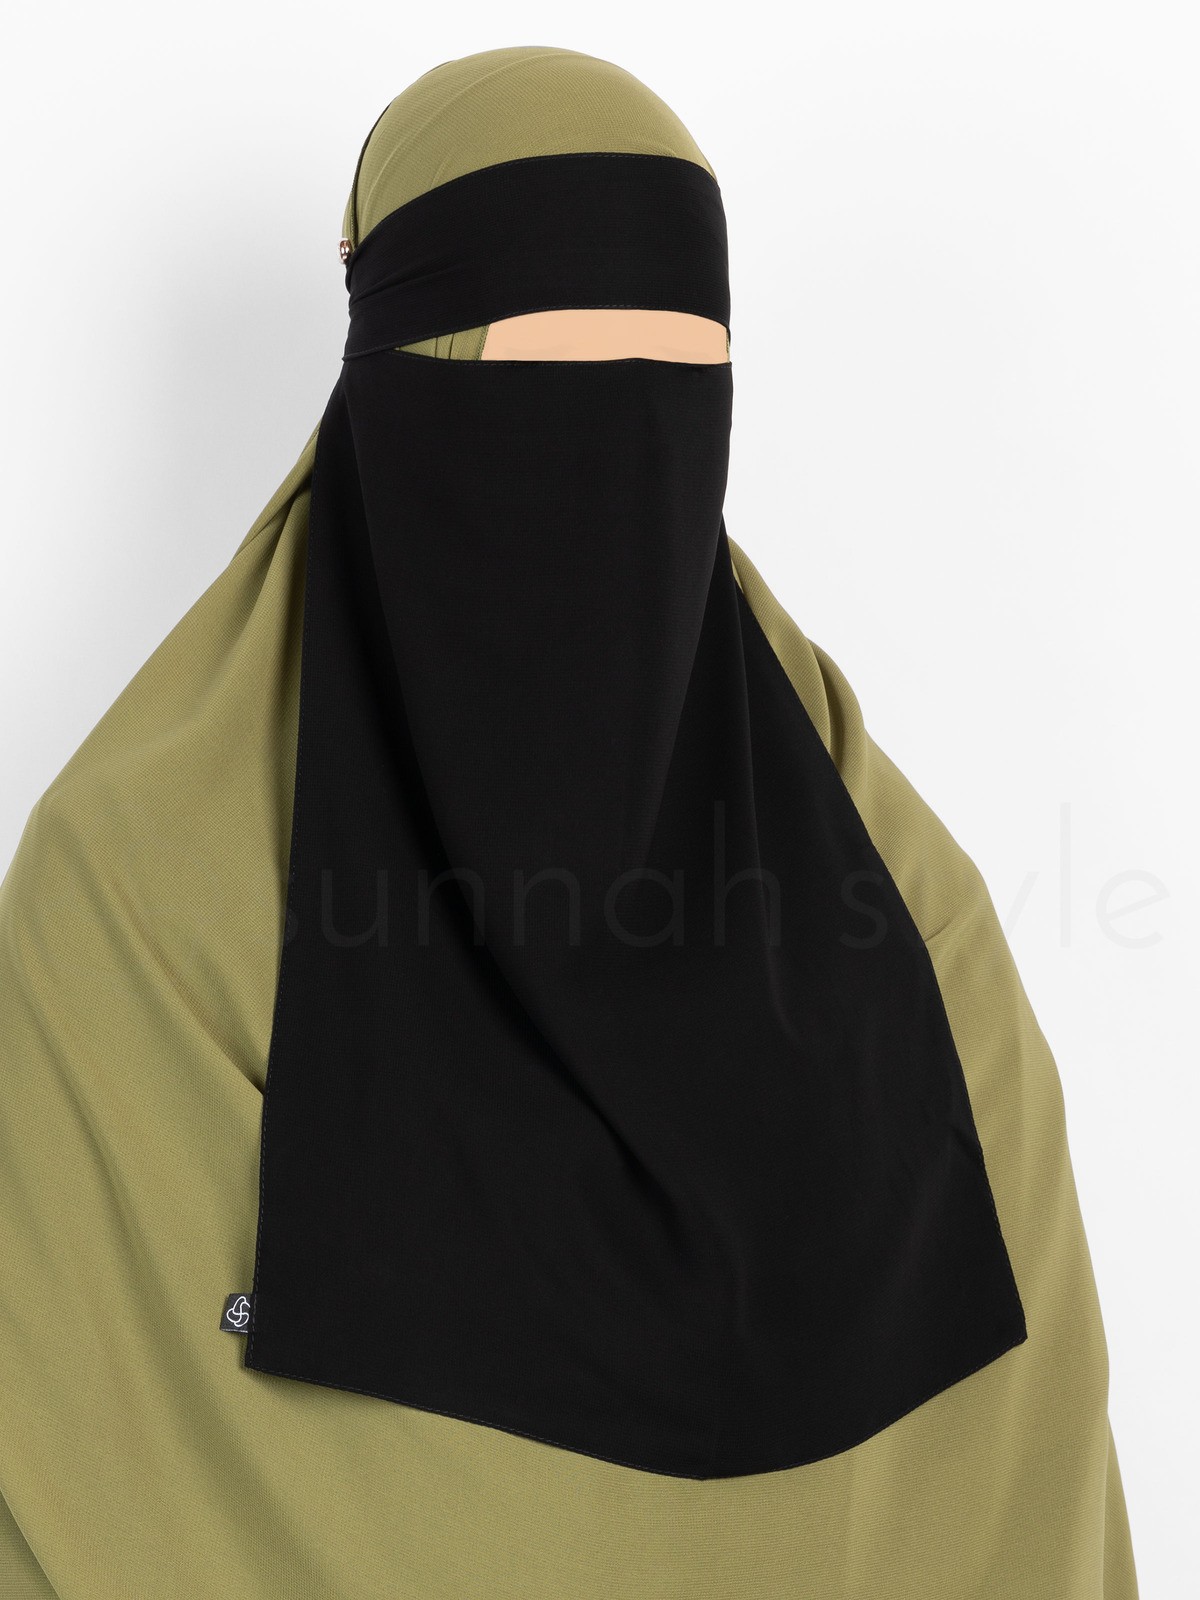 Sunnah Style - Pull-Down One Layer Niqab (Black)